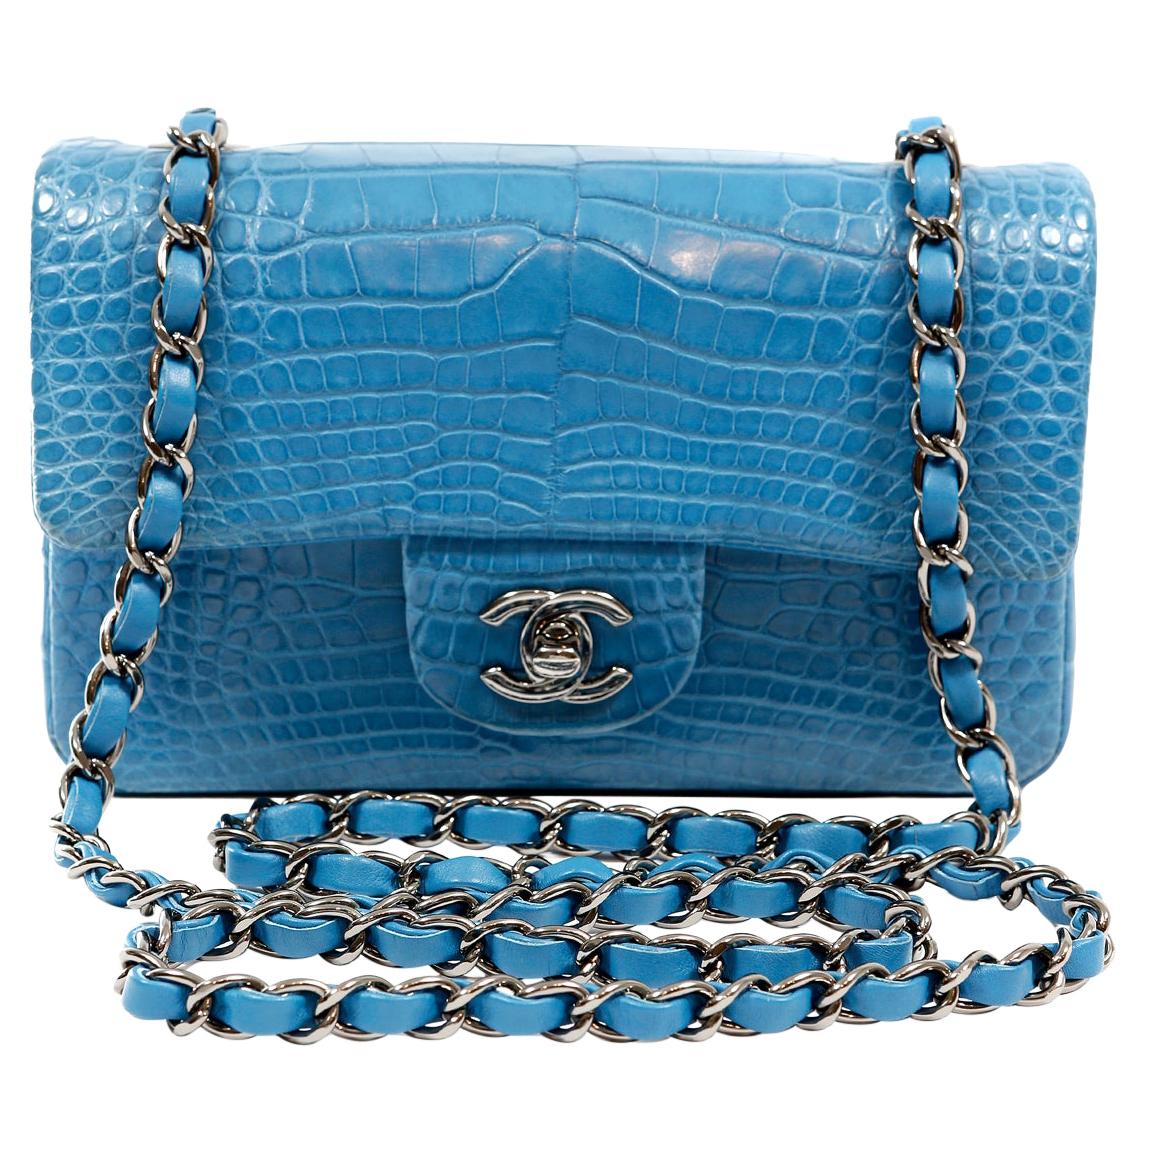 Chanel Turquoise Blue Matte Alligator Small Classic Flap Bag